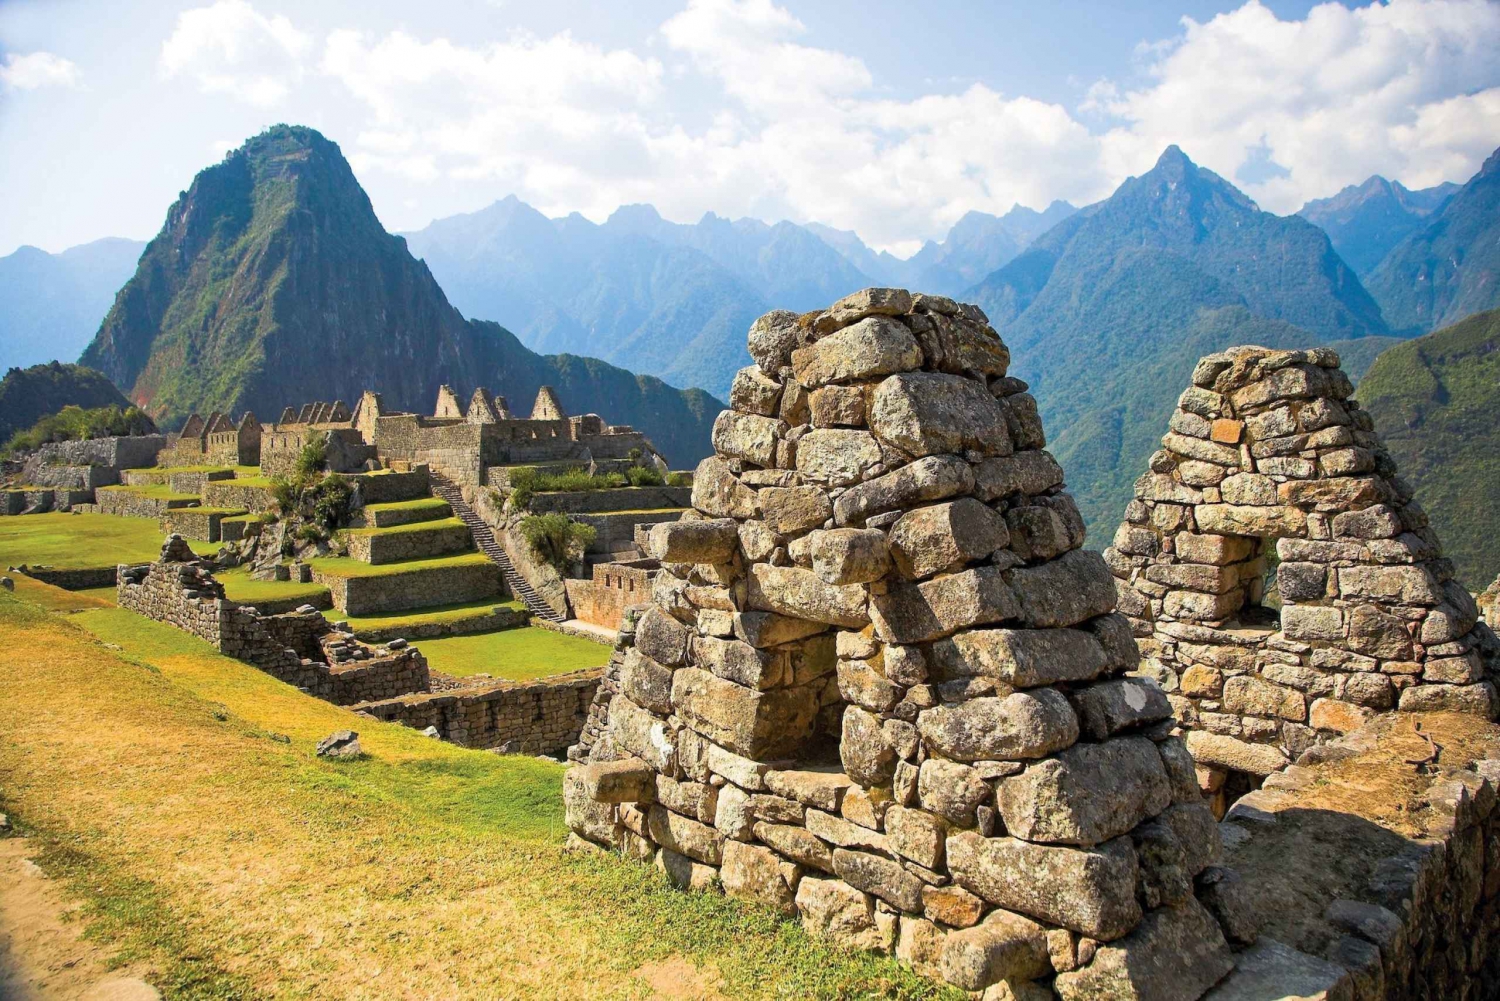 Machu Picchu: Guided Visit to the Lost City of the Incas